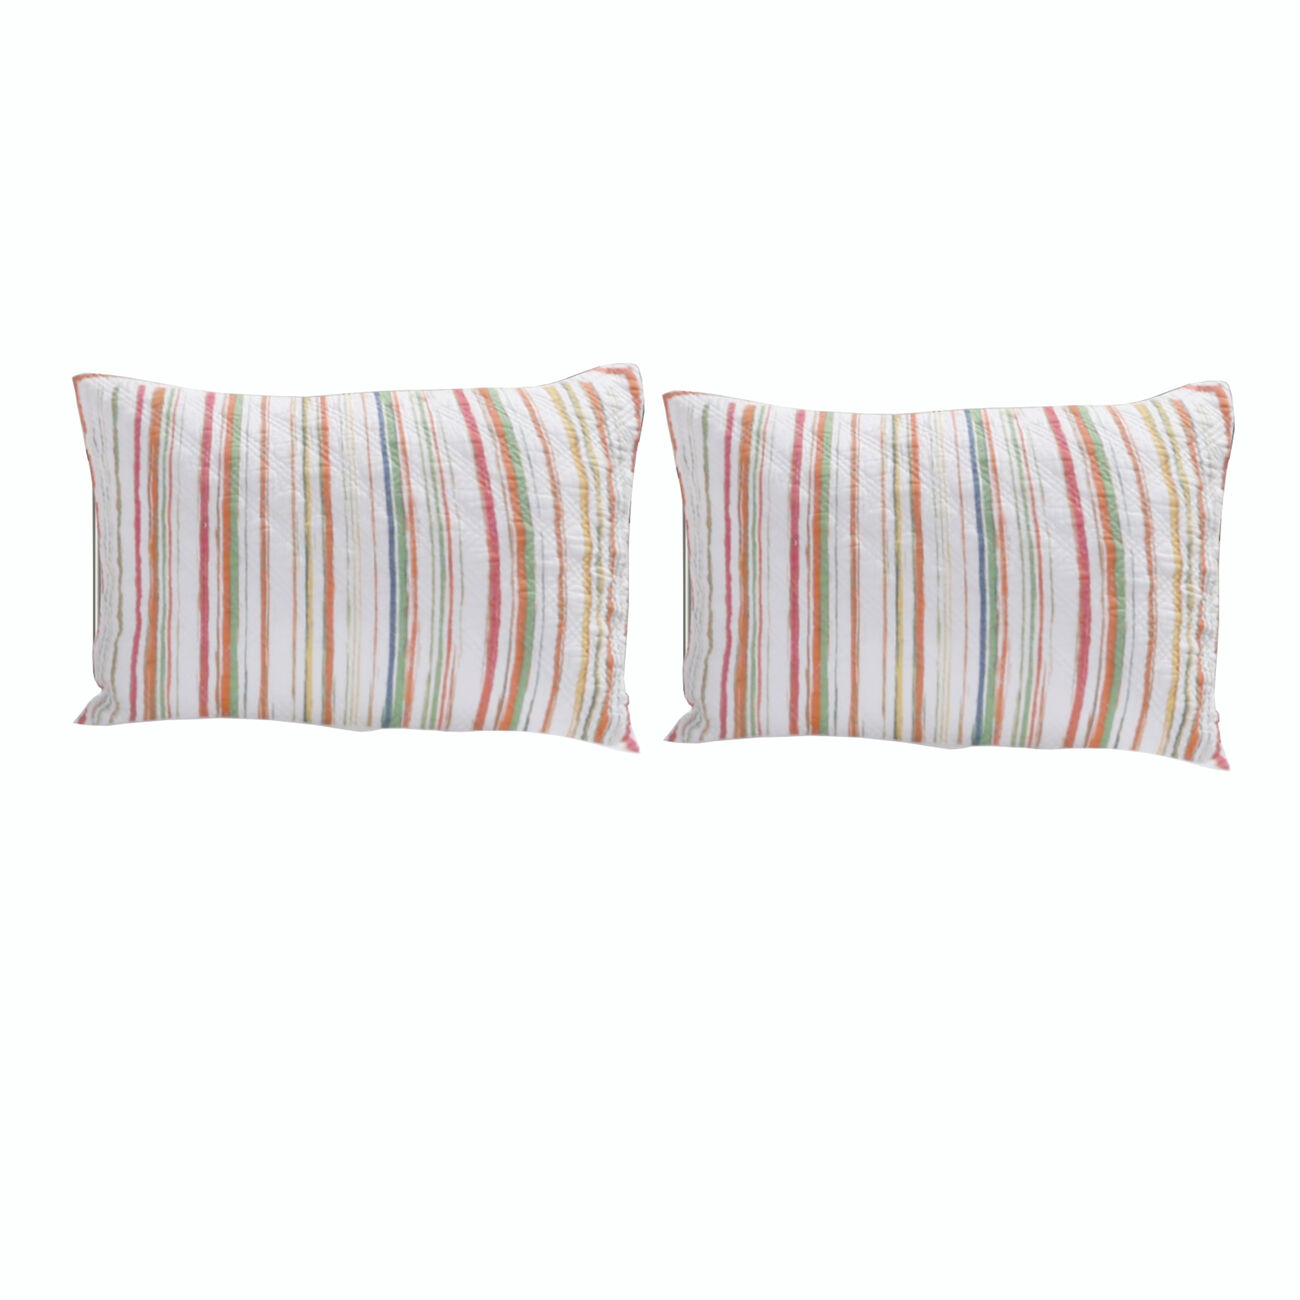 26 x 20 Polyester Standard Pillow Sham with Striped Print, Multicolor